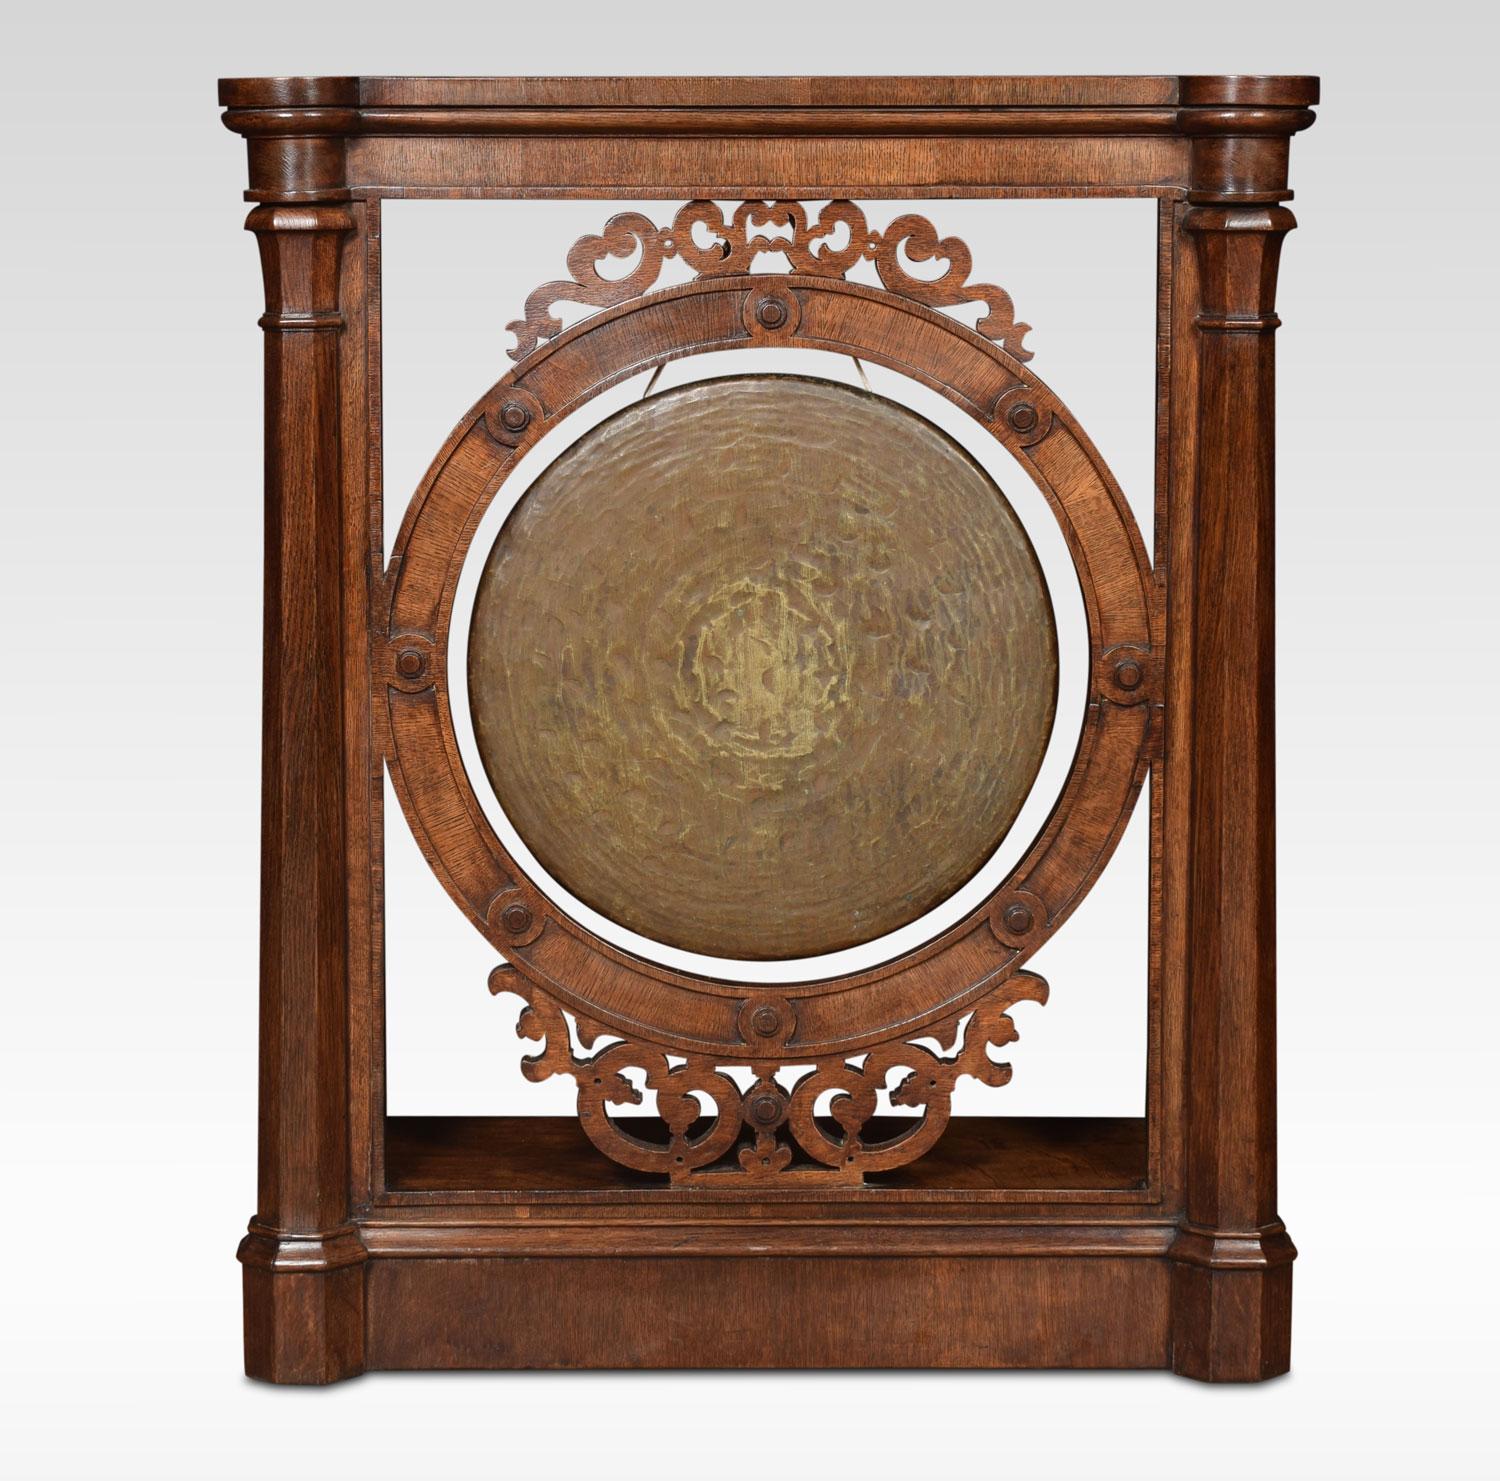 Dinner gong of Gothic design the oak frame with fretwork panels and octagonal column pilasters surrounding the original gong.
Dimensions:
Height 35.5 inches
Length 29.5 inches
Width 12.5 inches.